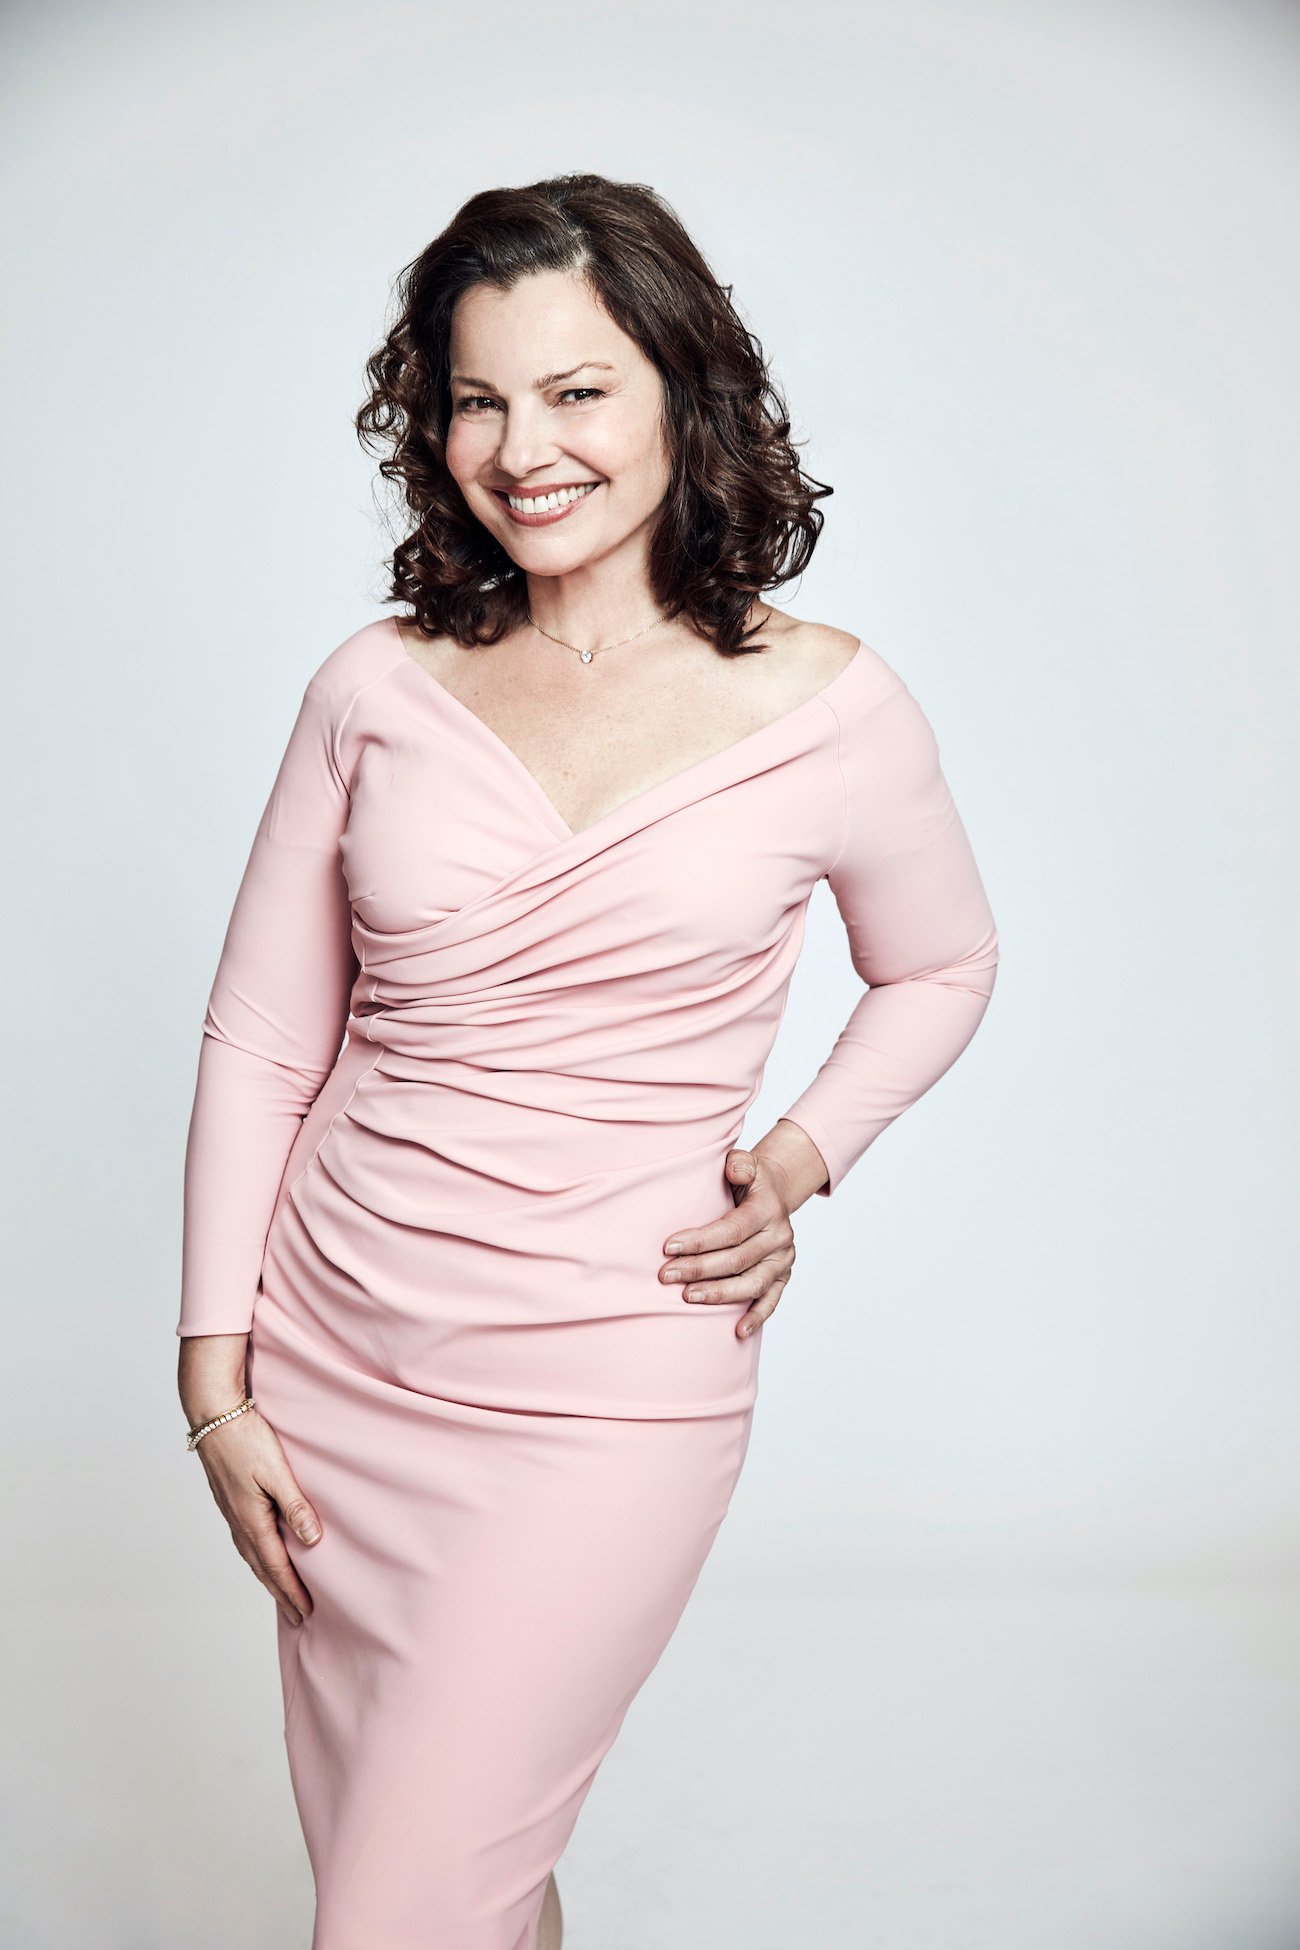 What Else Has ‘The Nanny’ Star Fran Drescher Been In?